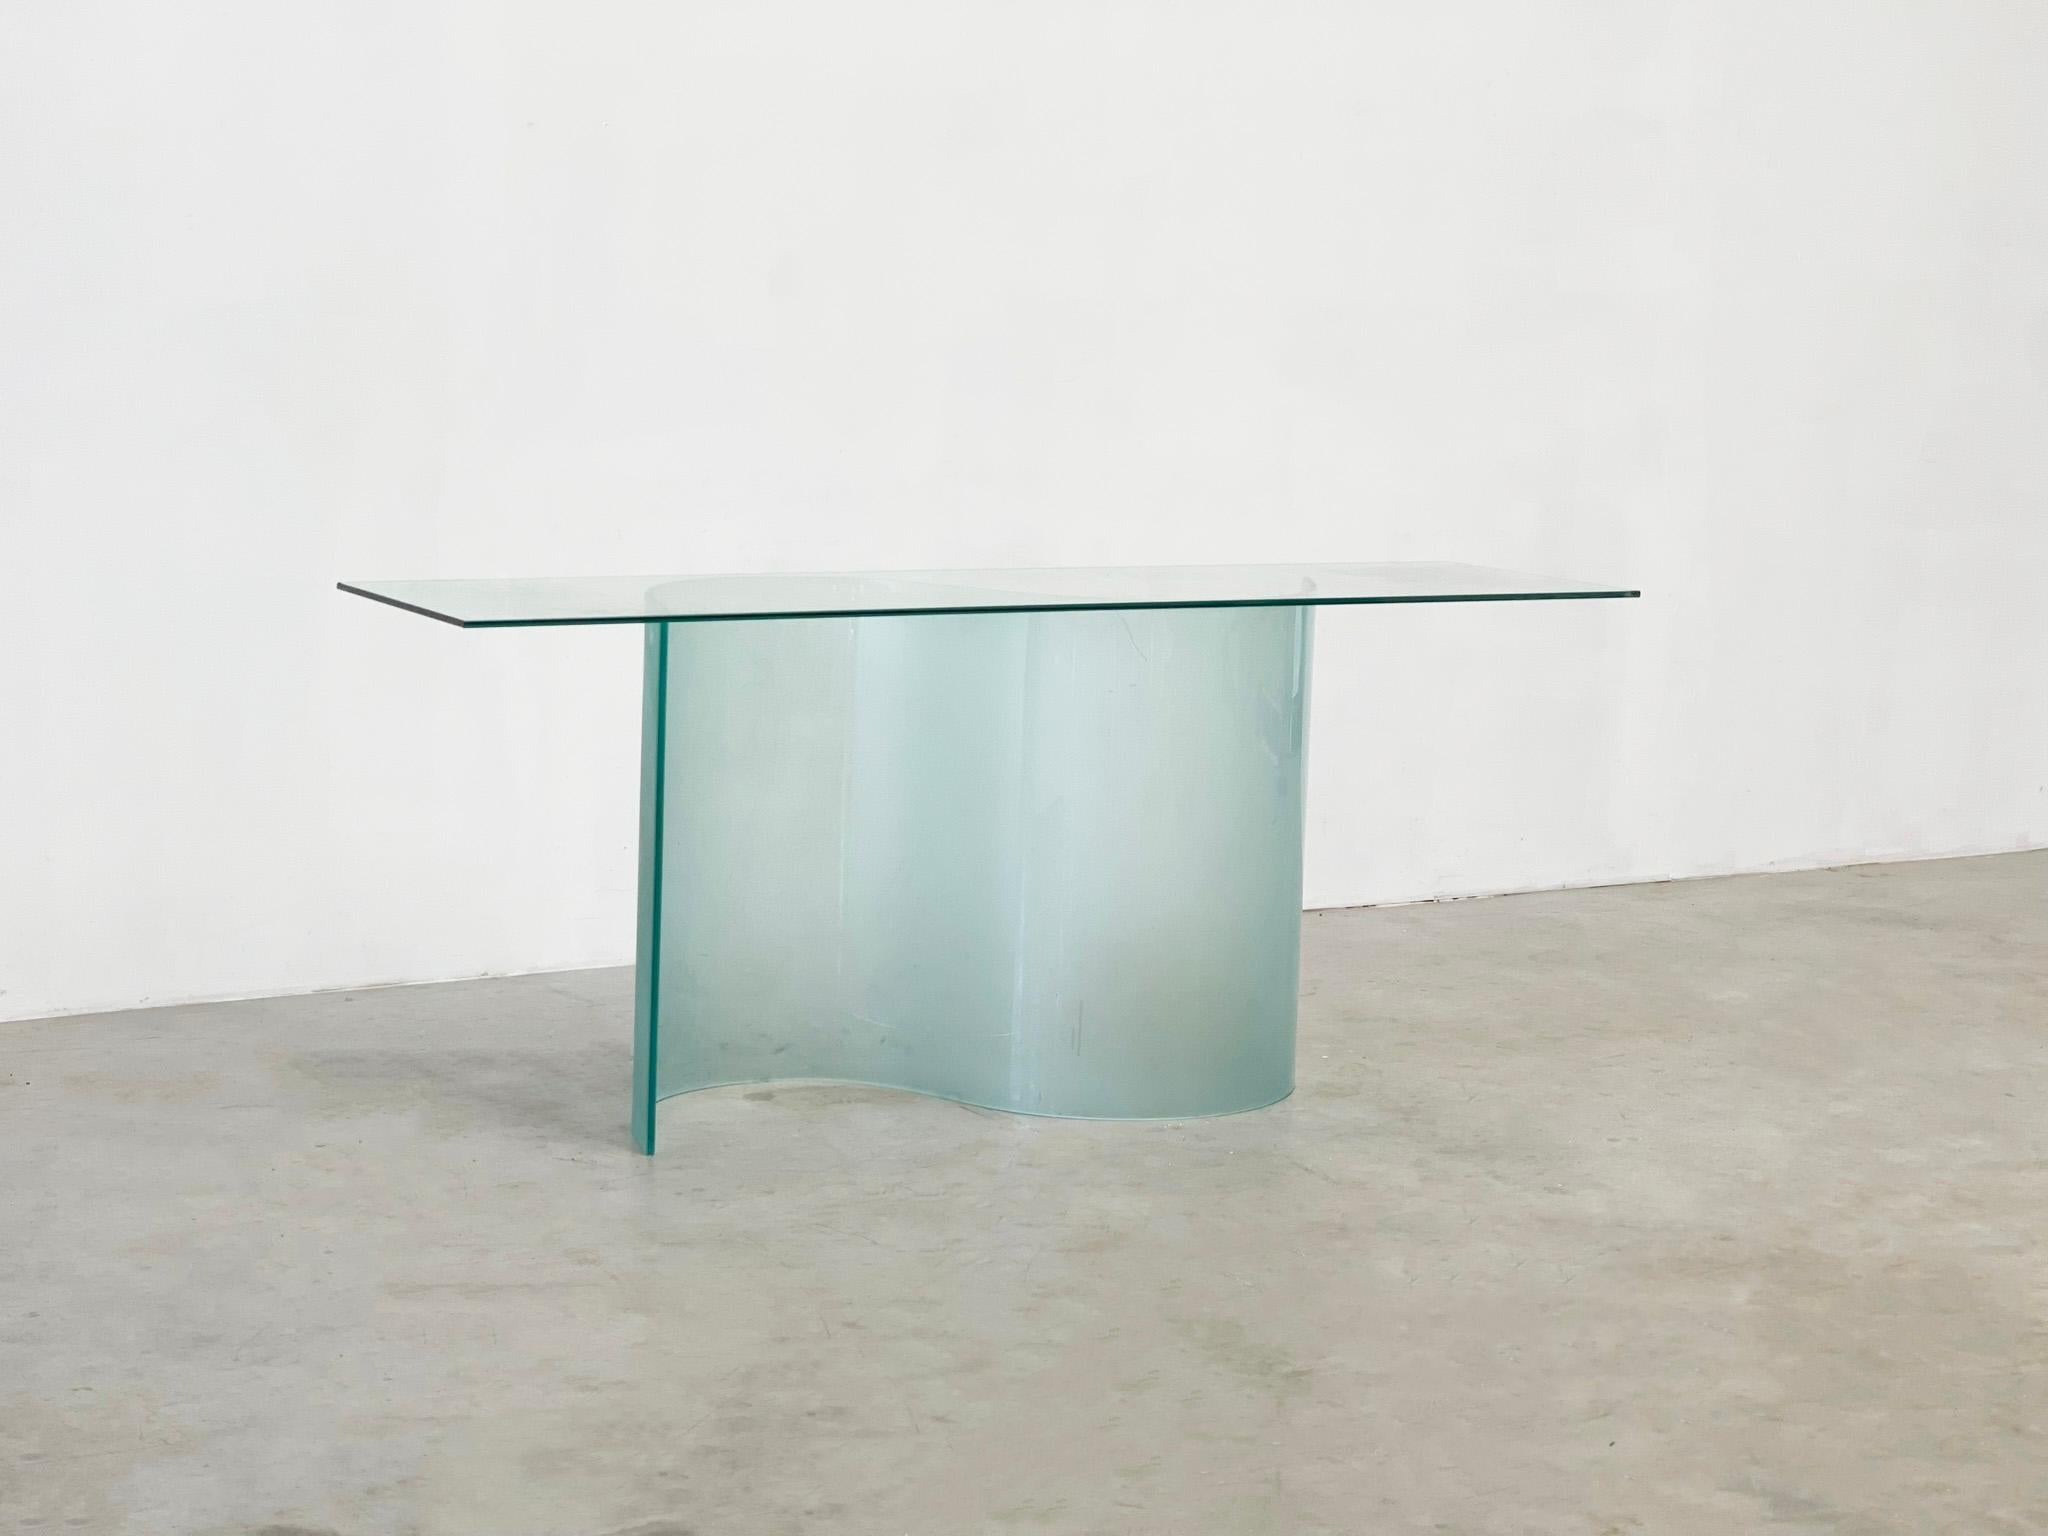 Fiam Marea console table in glass
Early 1990s console made in Italy. This console was designed and manufactured in italy in the 90s by the company FIAM Italia.

They are known for making their furniture 100% out of glass, displaying a beautiful